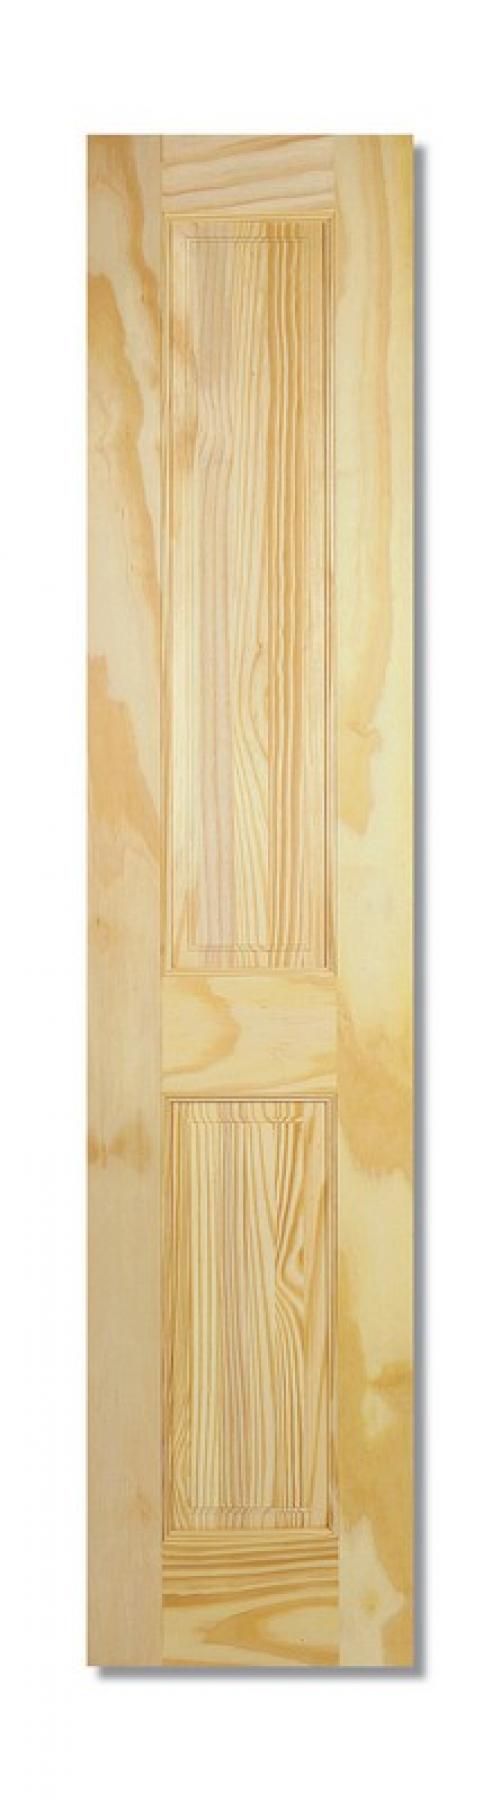 Image for 78X30 4 PANEL CLEAR PINE